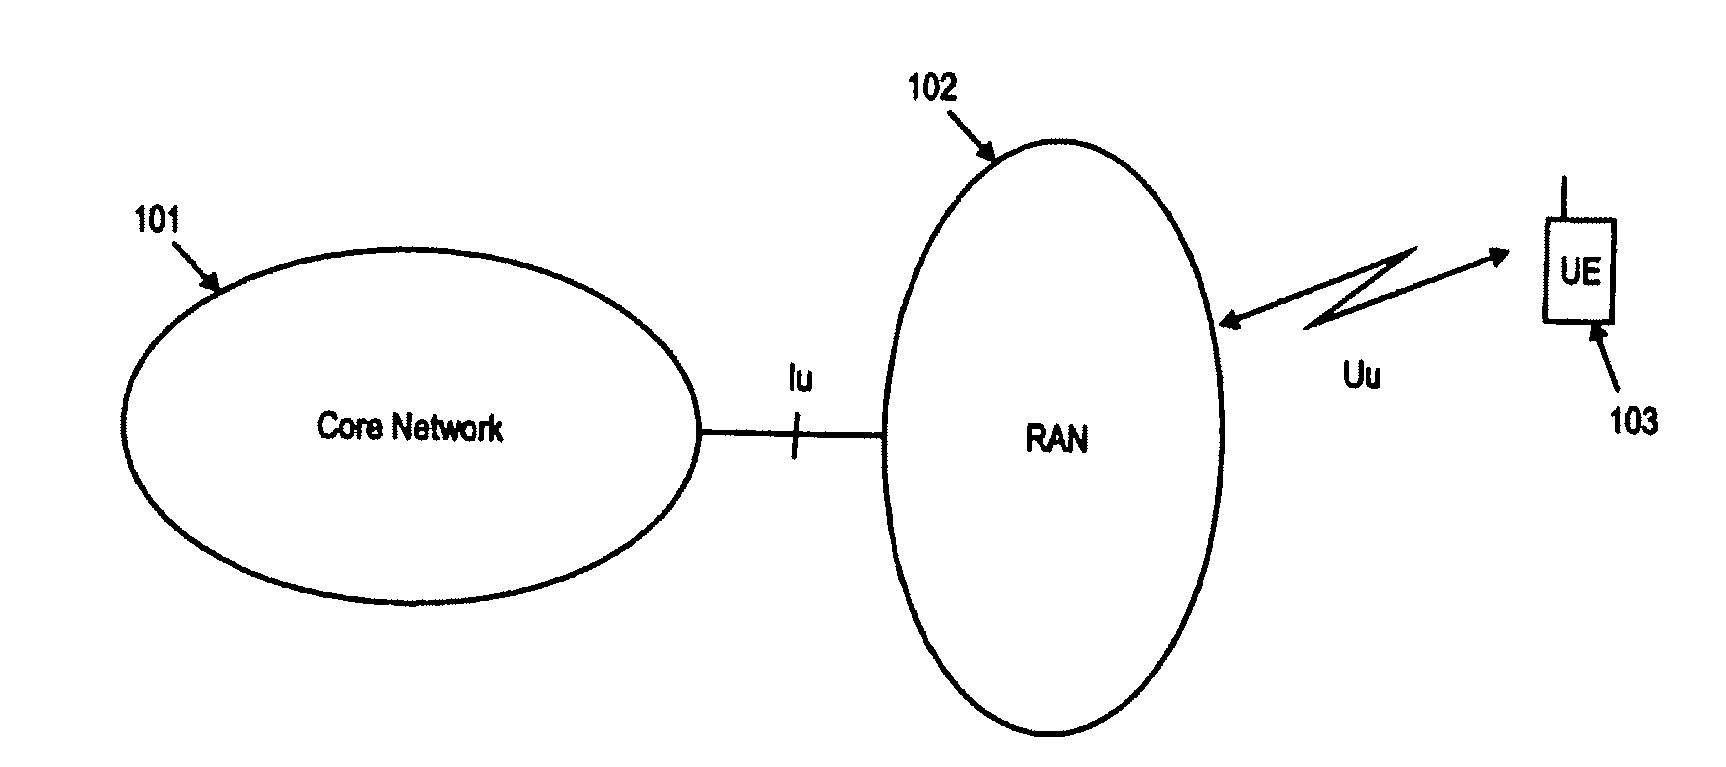 Uplink resource allocation in a mobile communication system